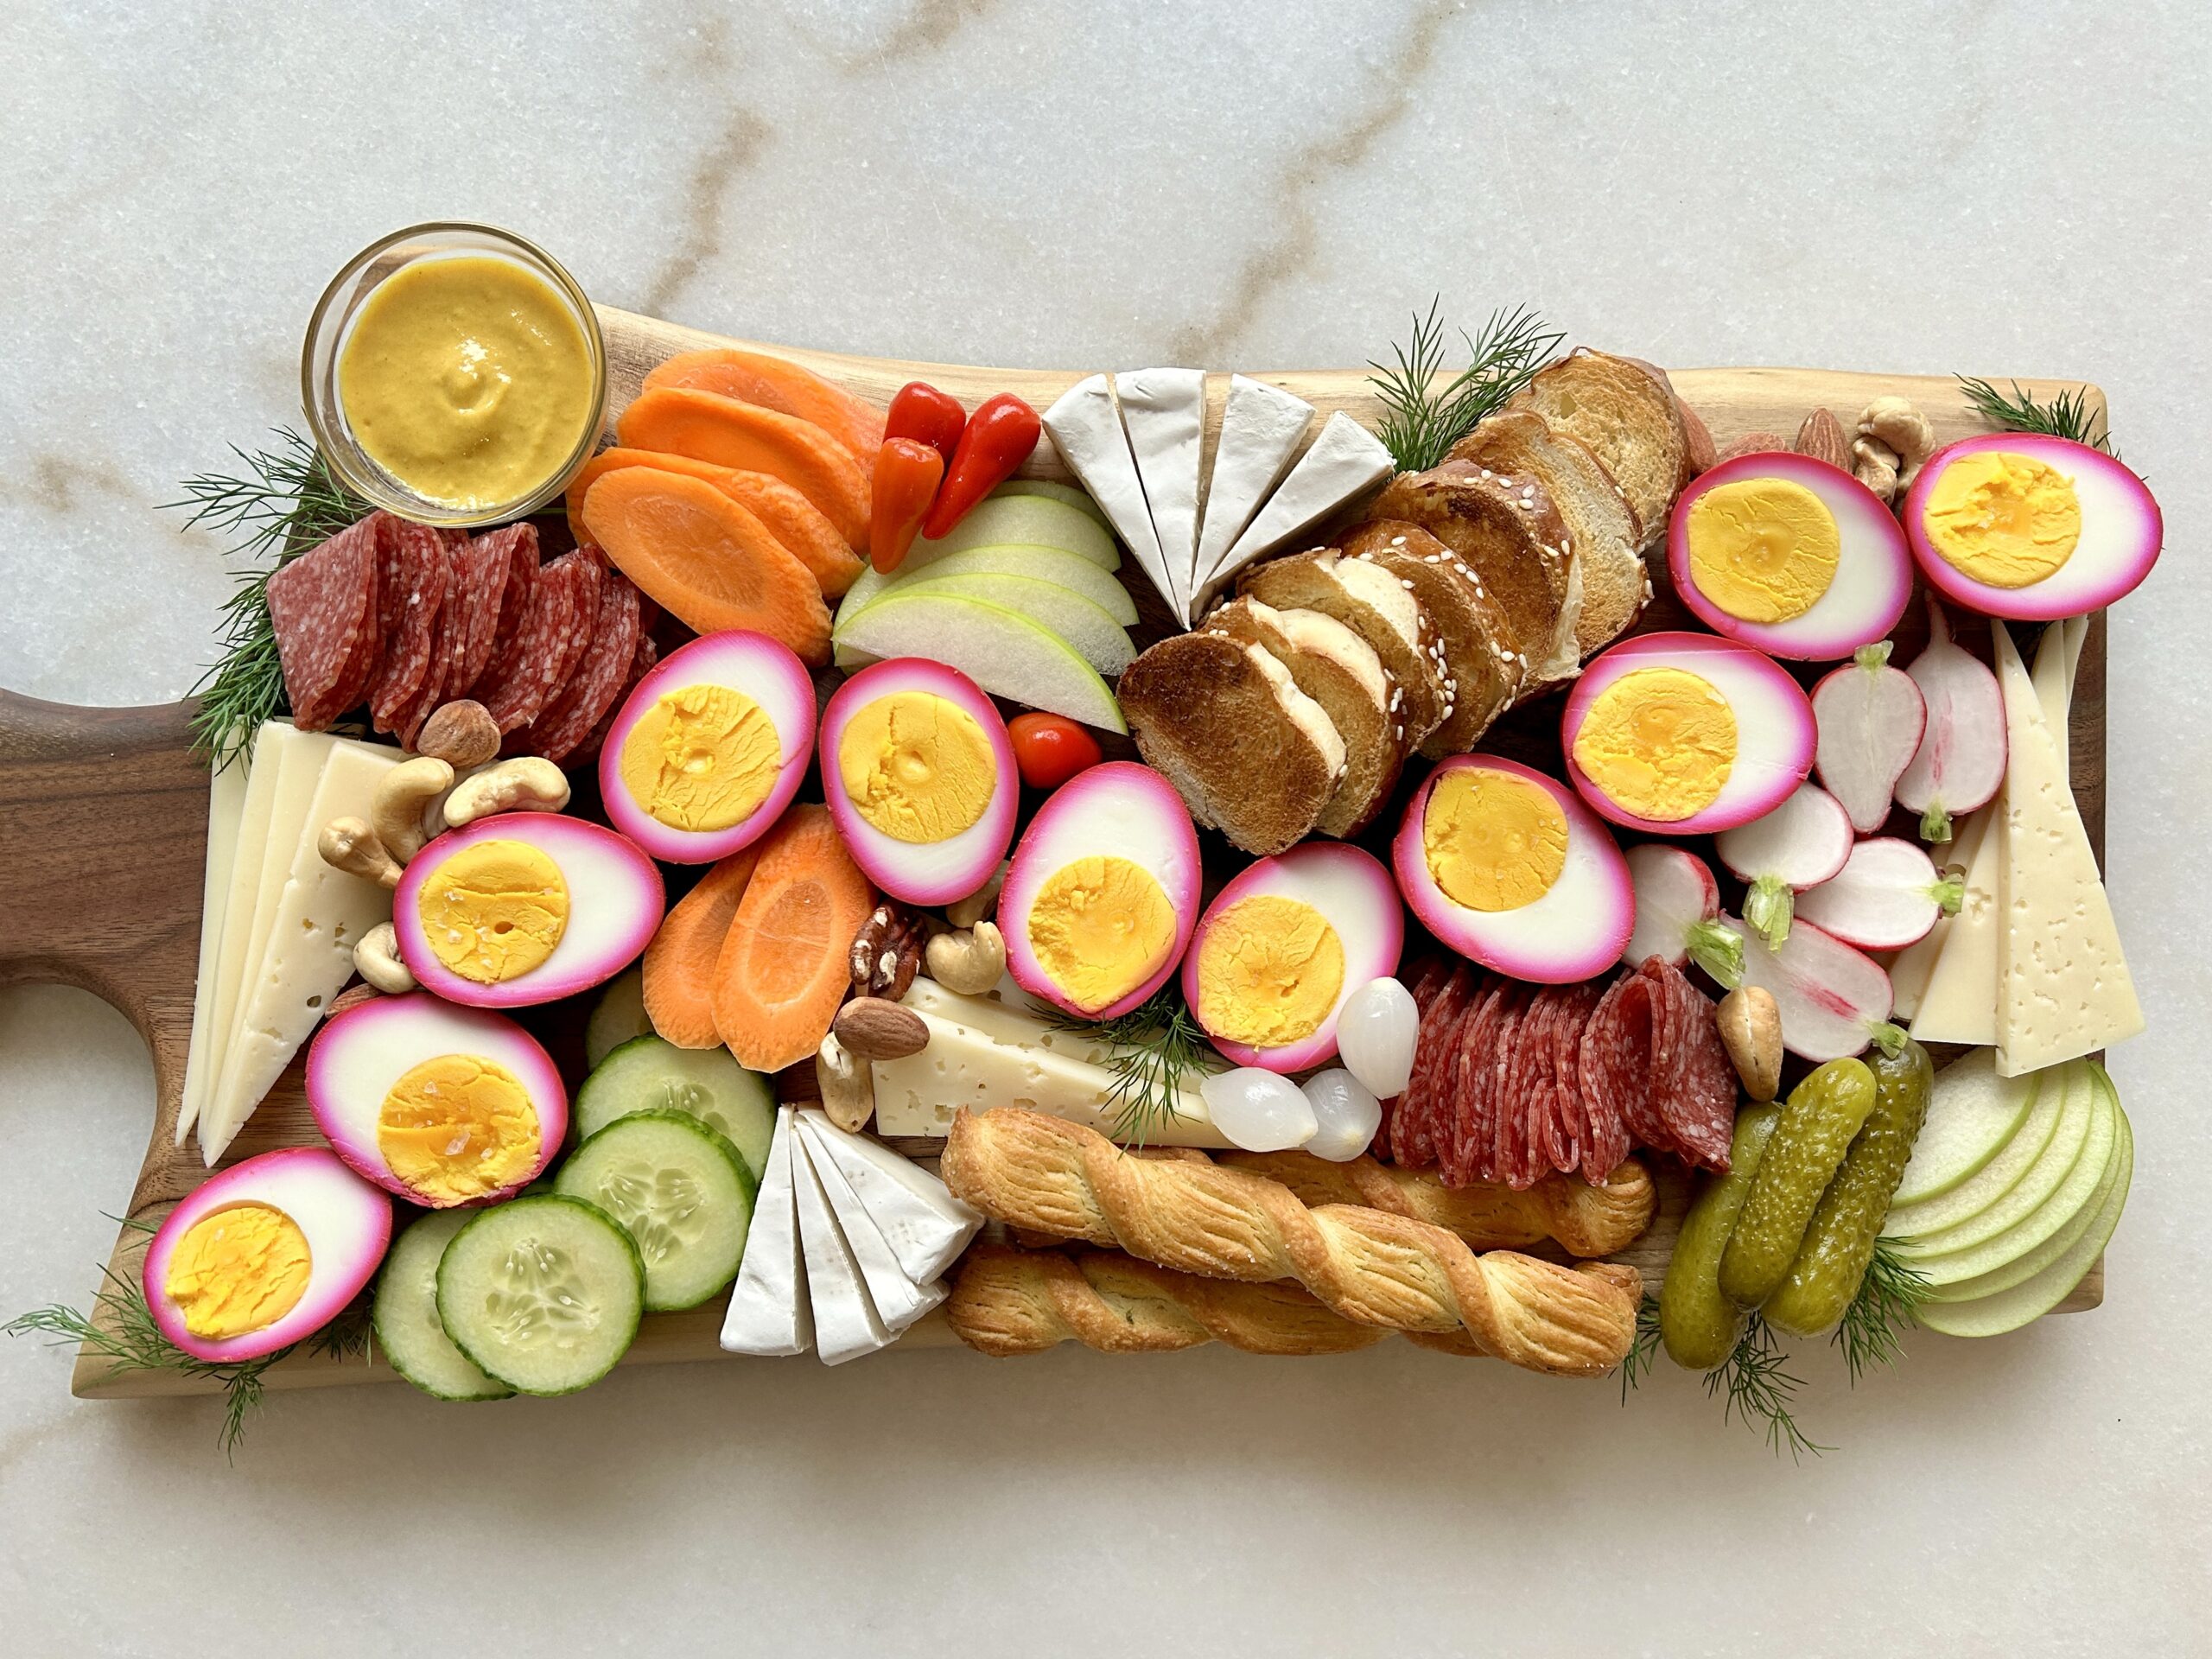 German-Inspired Charcuterie Board with Beet-Pickled Eggs